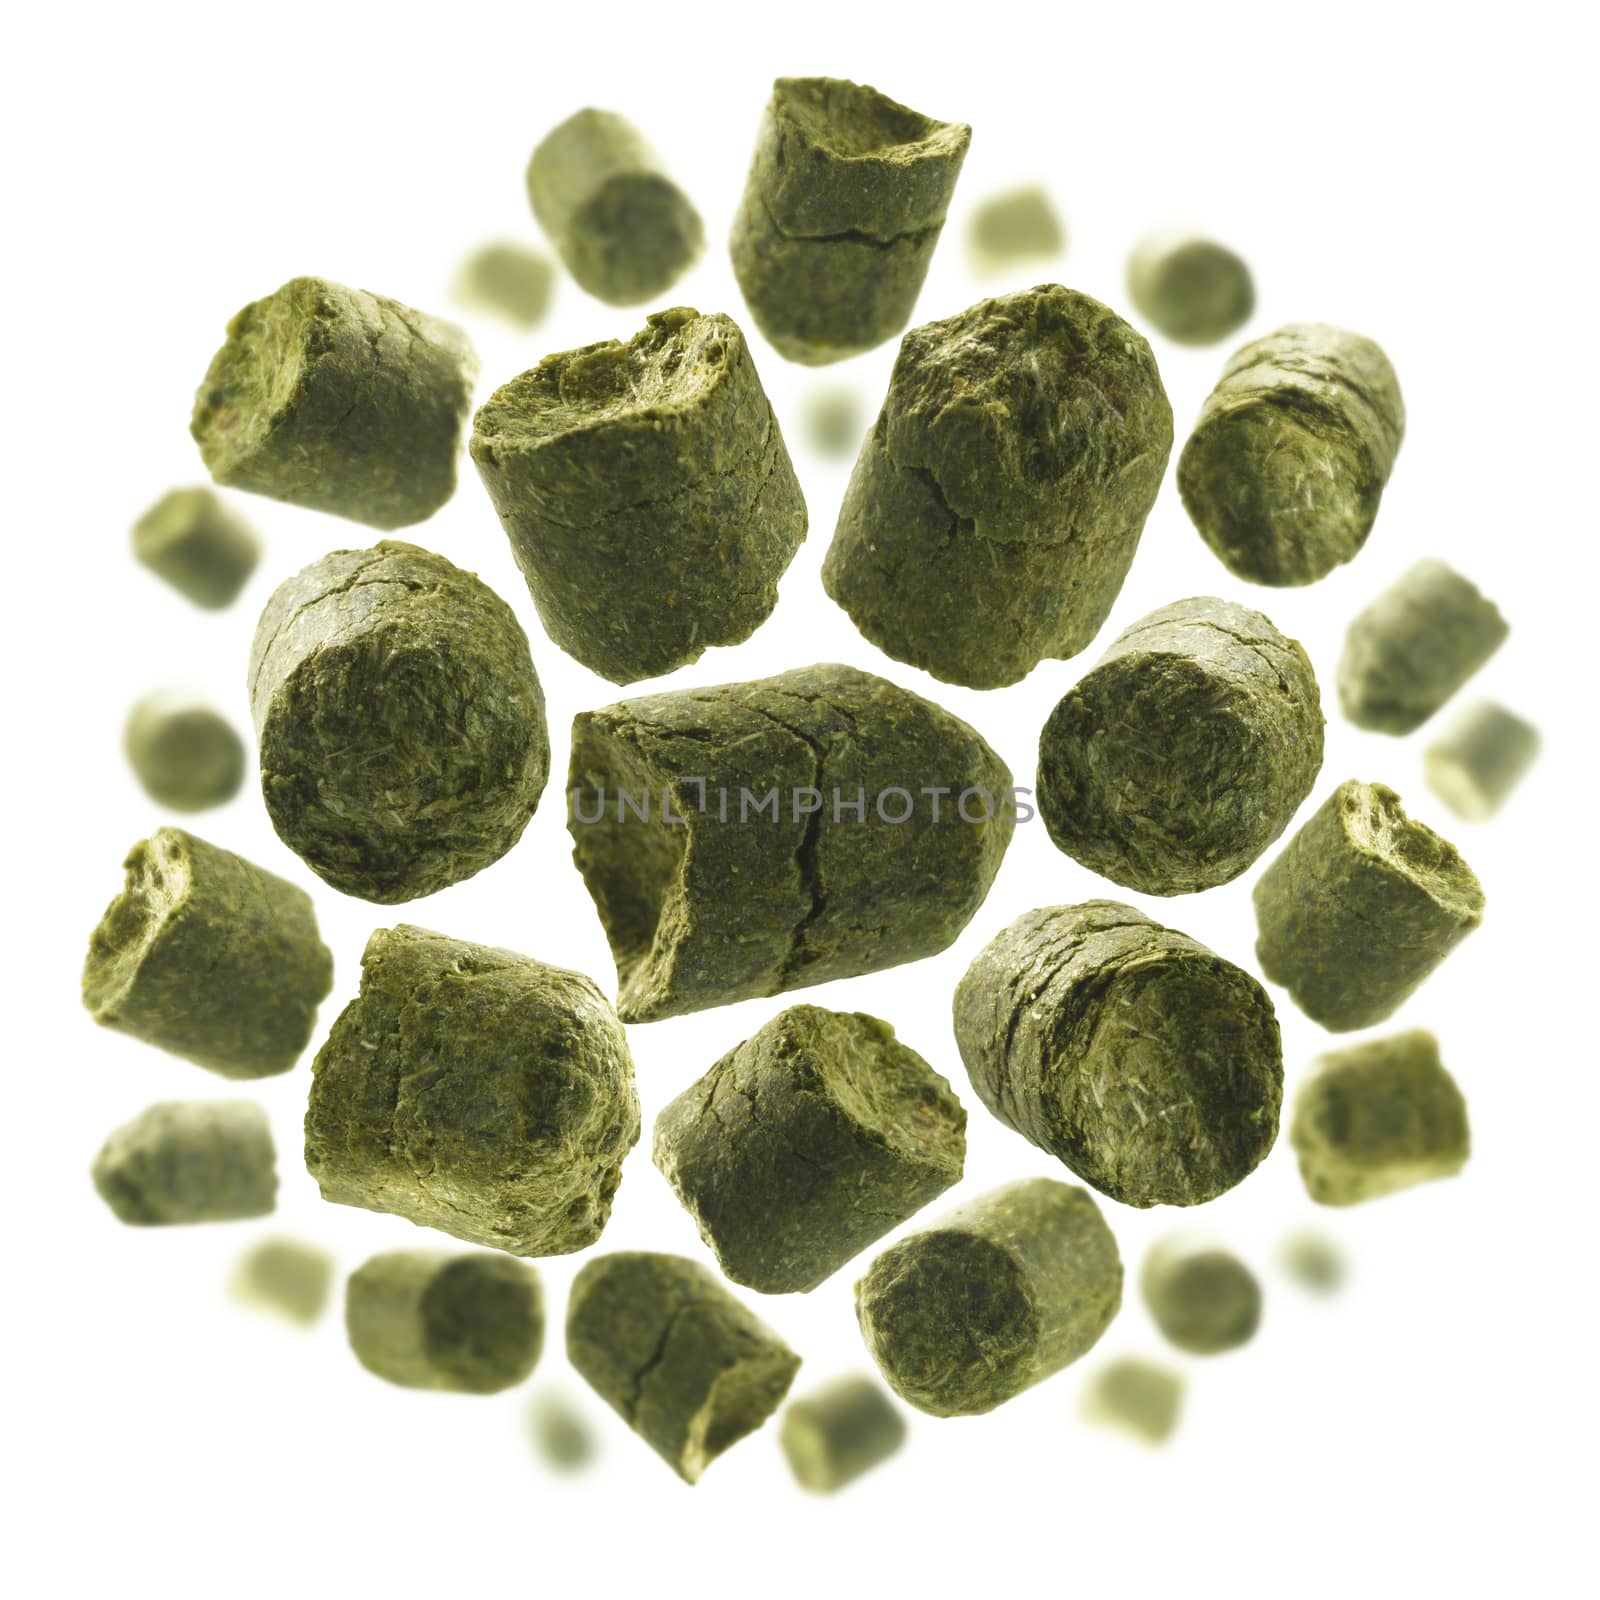 Green granulated hops levitate on a white background.